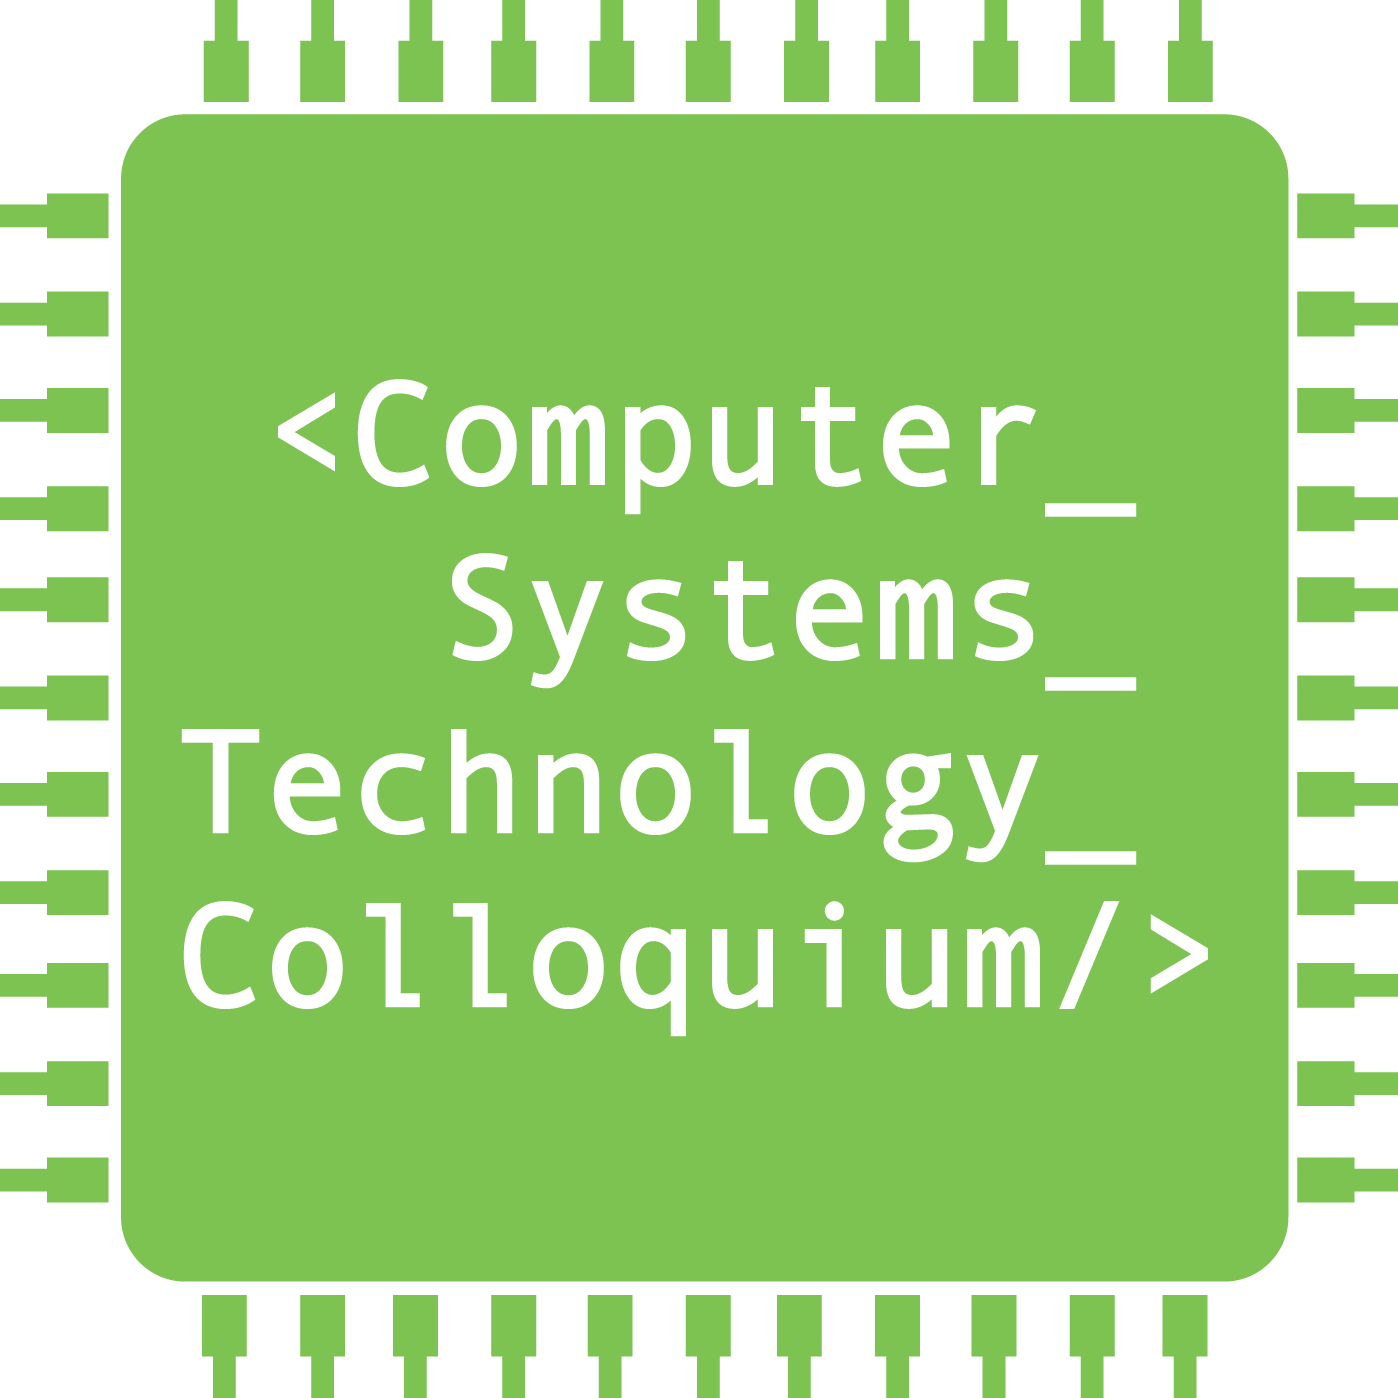 Colloquium series of the Department of Computer Systems Technology at the New York City College of Technology of the City University of New York